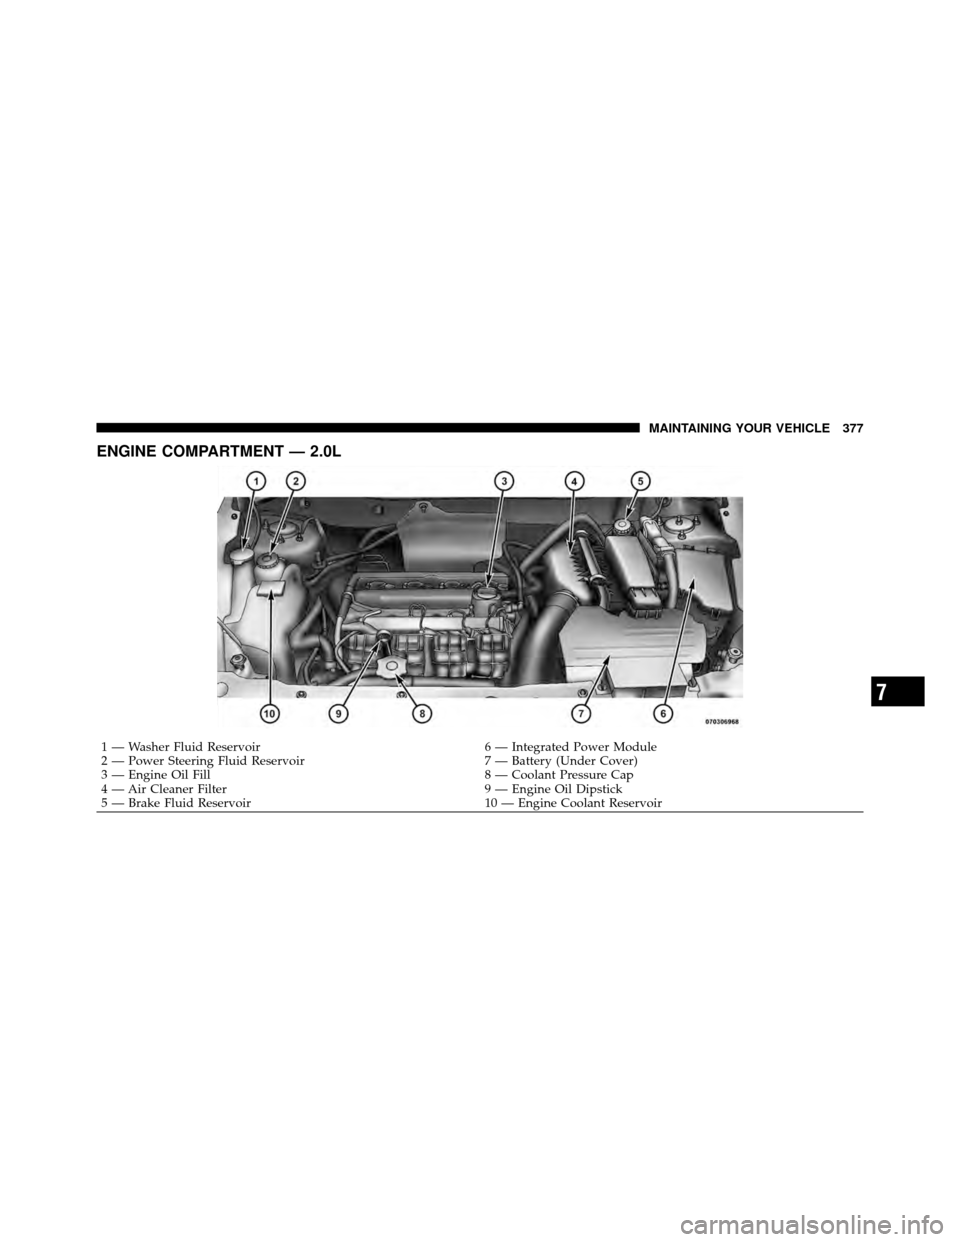 JEEP COMPASS 2010 1.G Owners Manual ENGINE COMPARTMENT — 2.0L
1 — Washer Fluid Reservoir6 — Integrated Power Module
2 — Power Steering Fluid Reservoir 7 — Battery (Under Cover)
3 — Engine Oil Fill 8 — Coolant Pressure Cap
